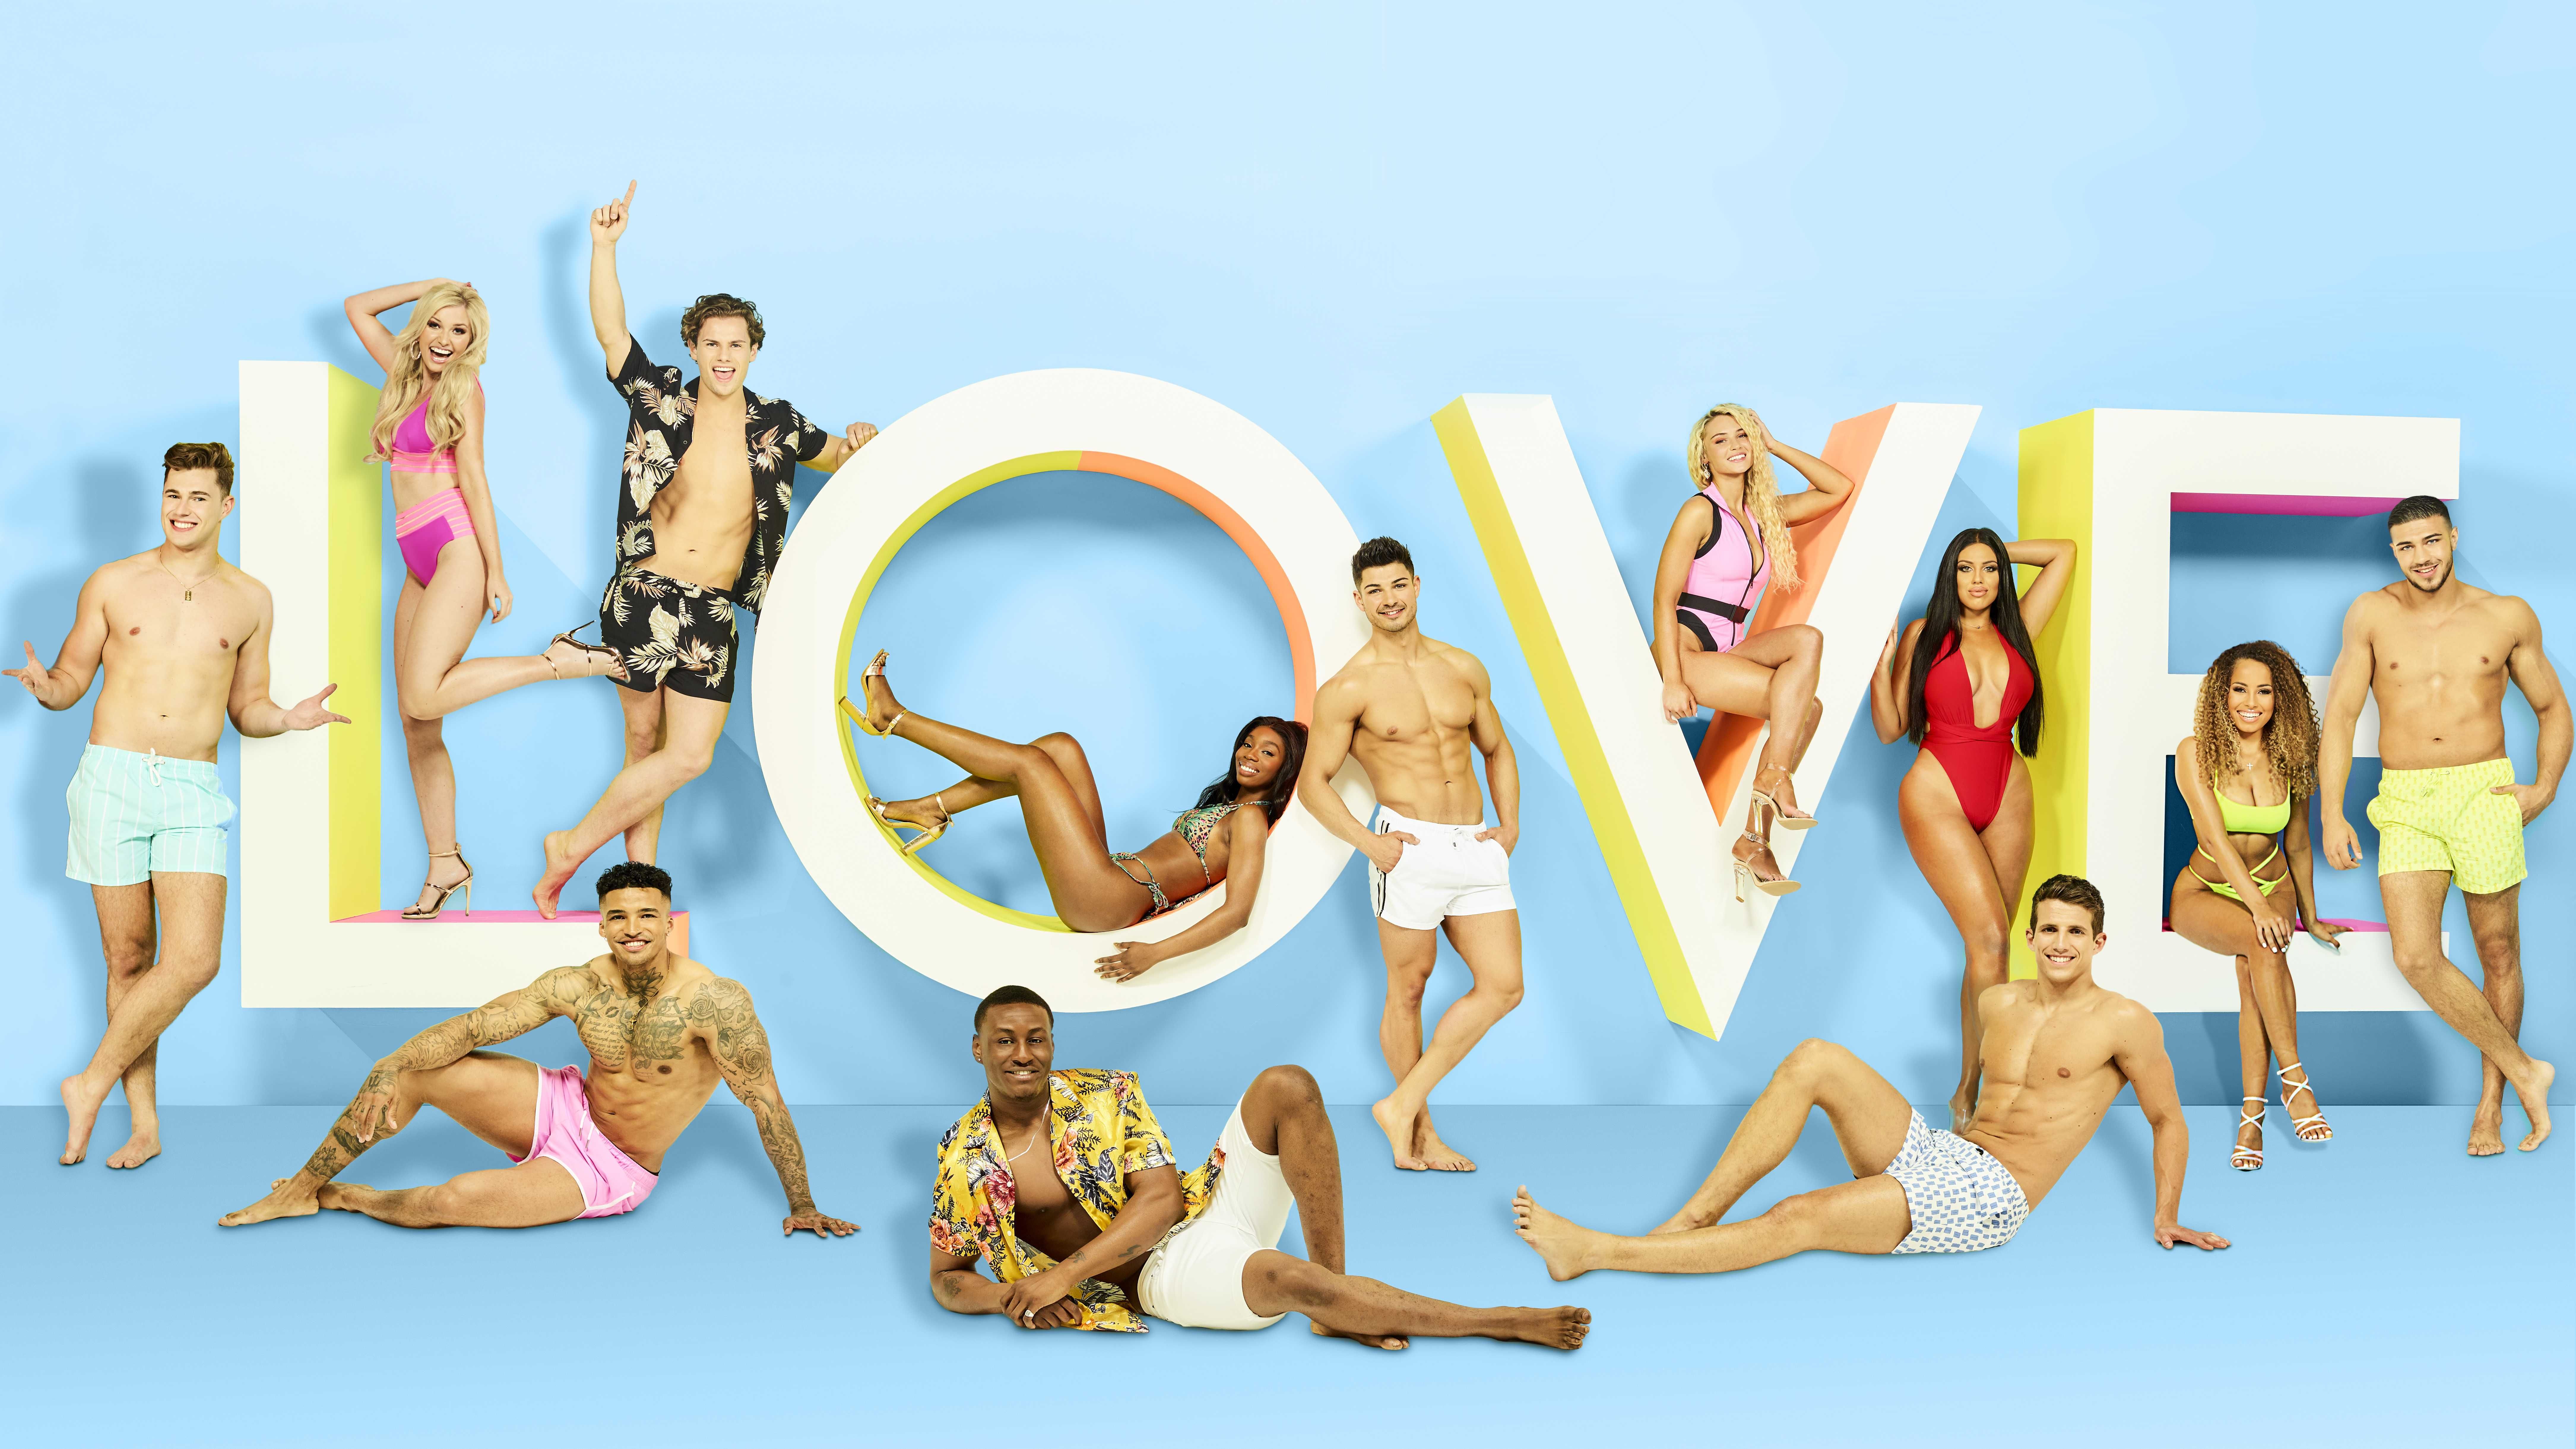 Is the Love Island soundtrack the *real* reason were watching? pic pic